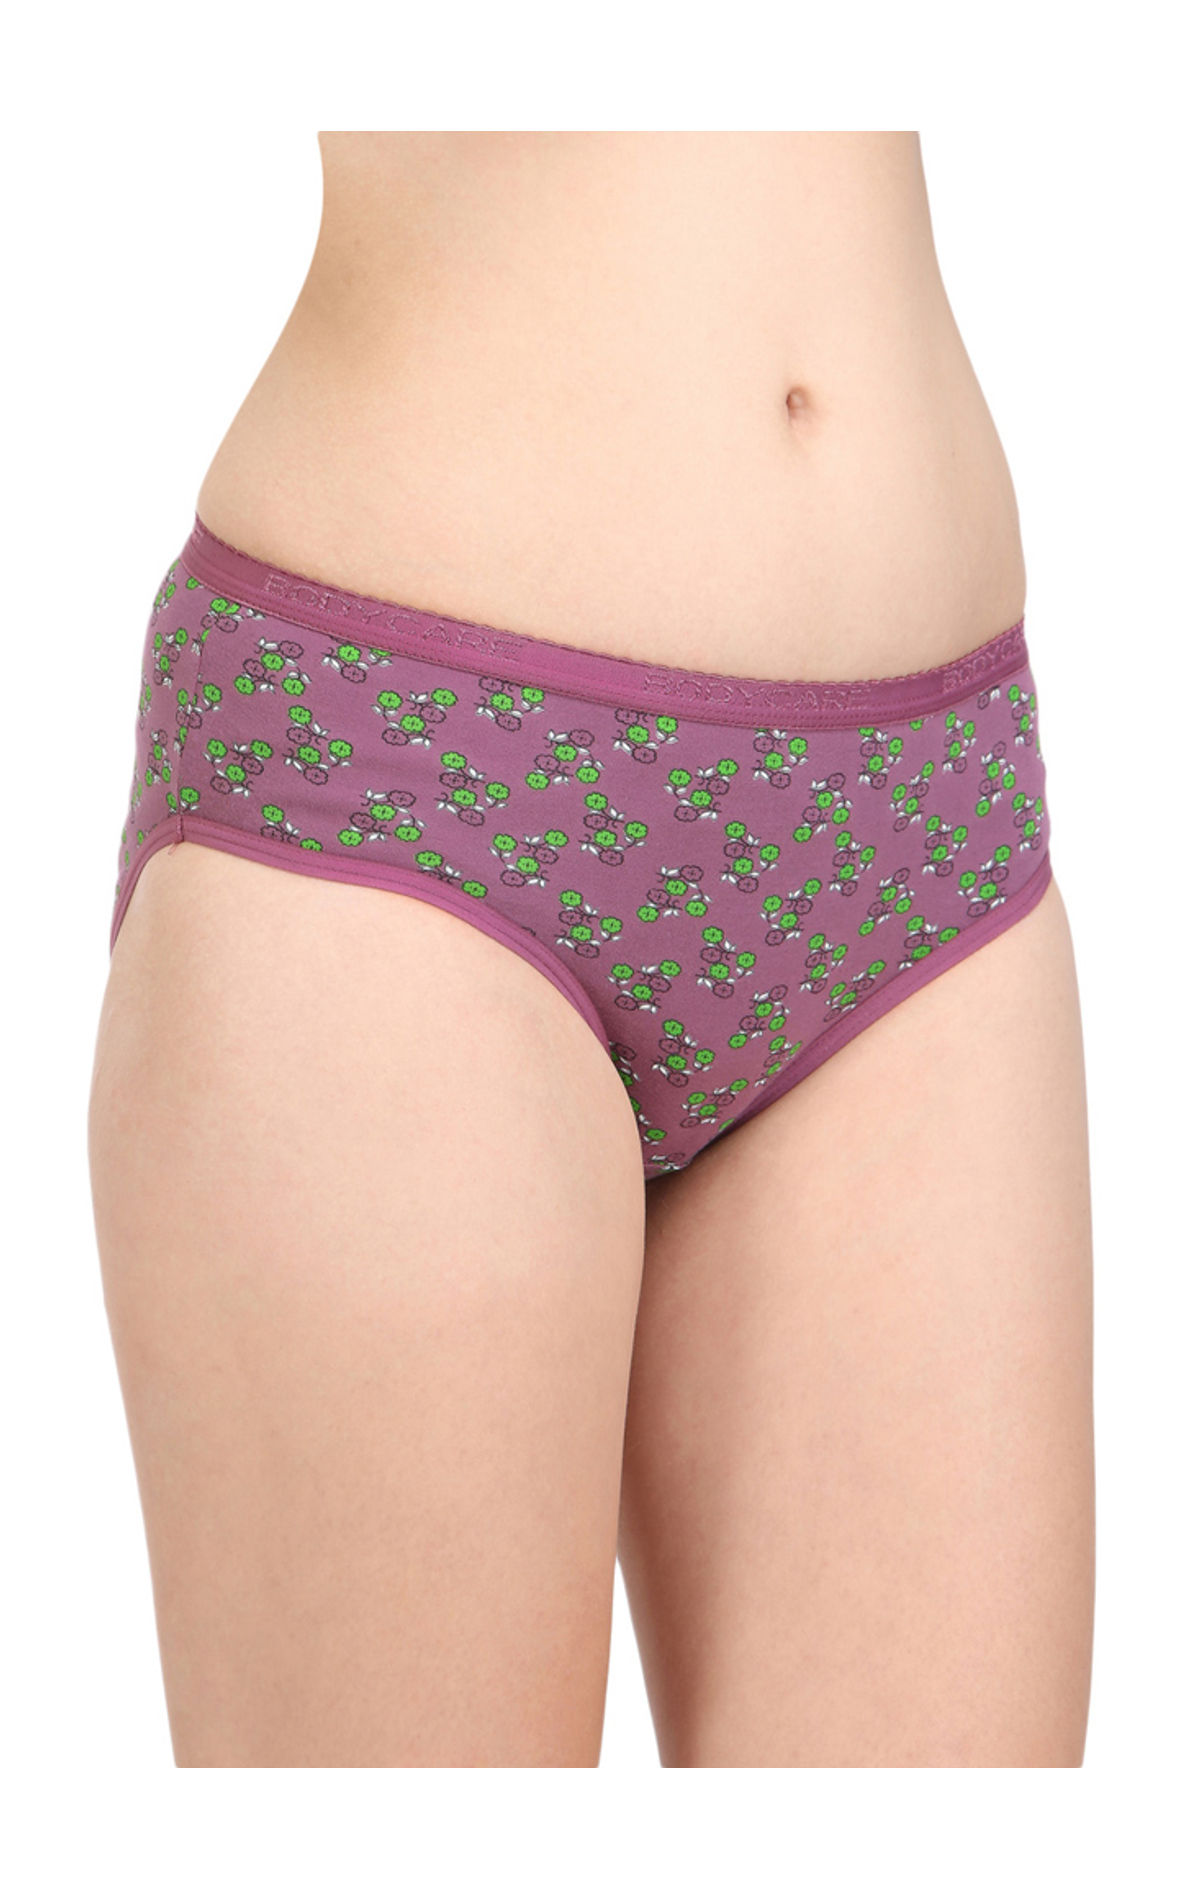 Buy BODYCARE Women's Cotton Printed Brief(8400_XL_Assorted) Pack of 3 at